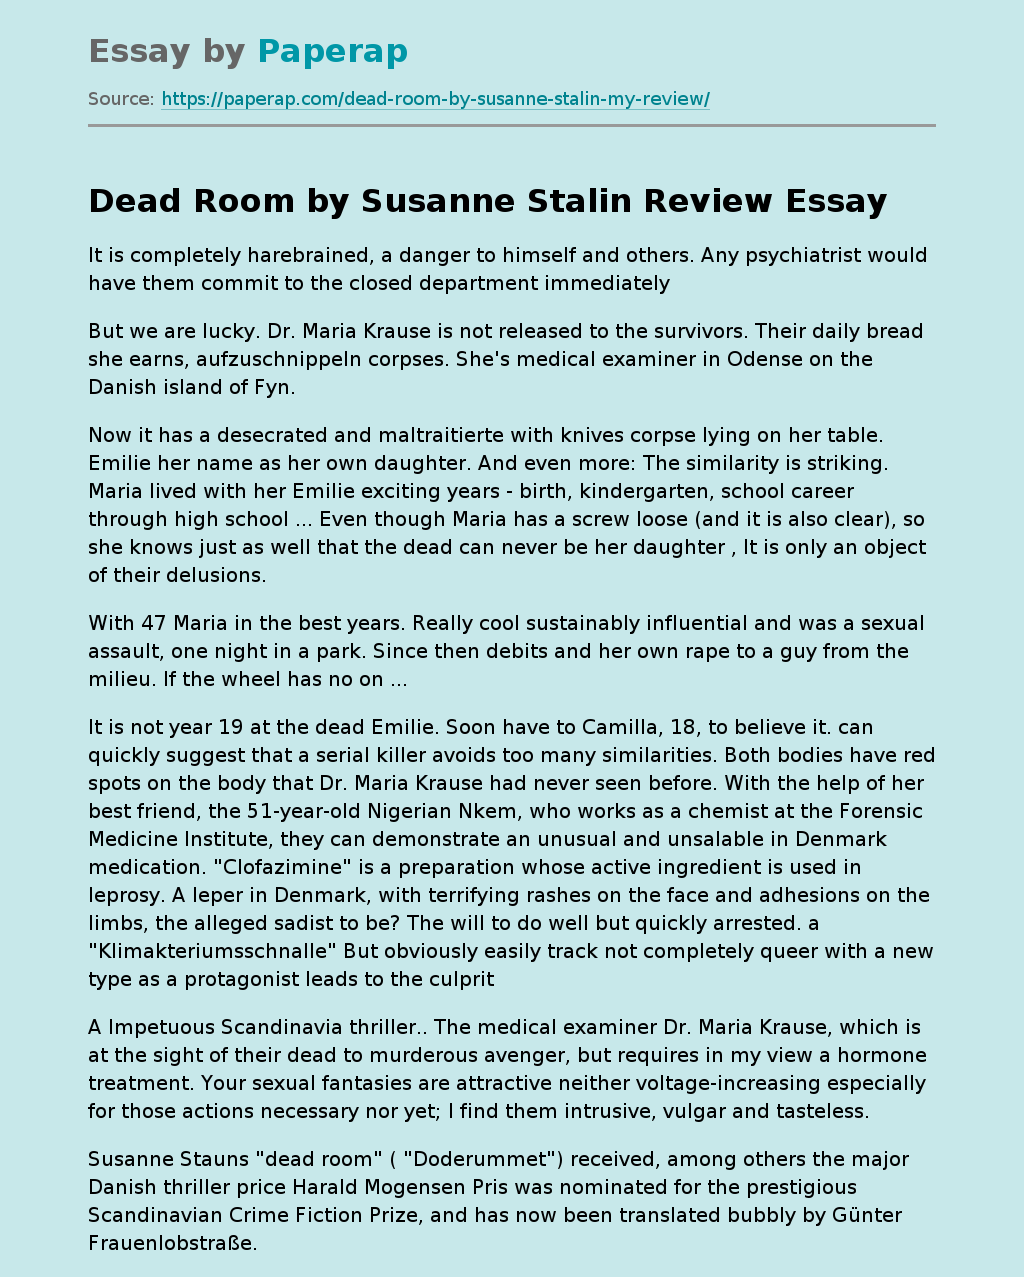 Dead Room by Susanne Stalin Review